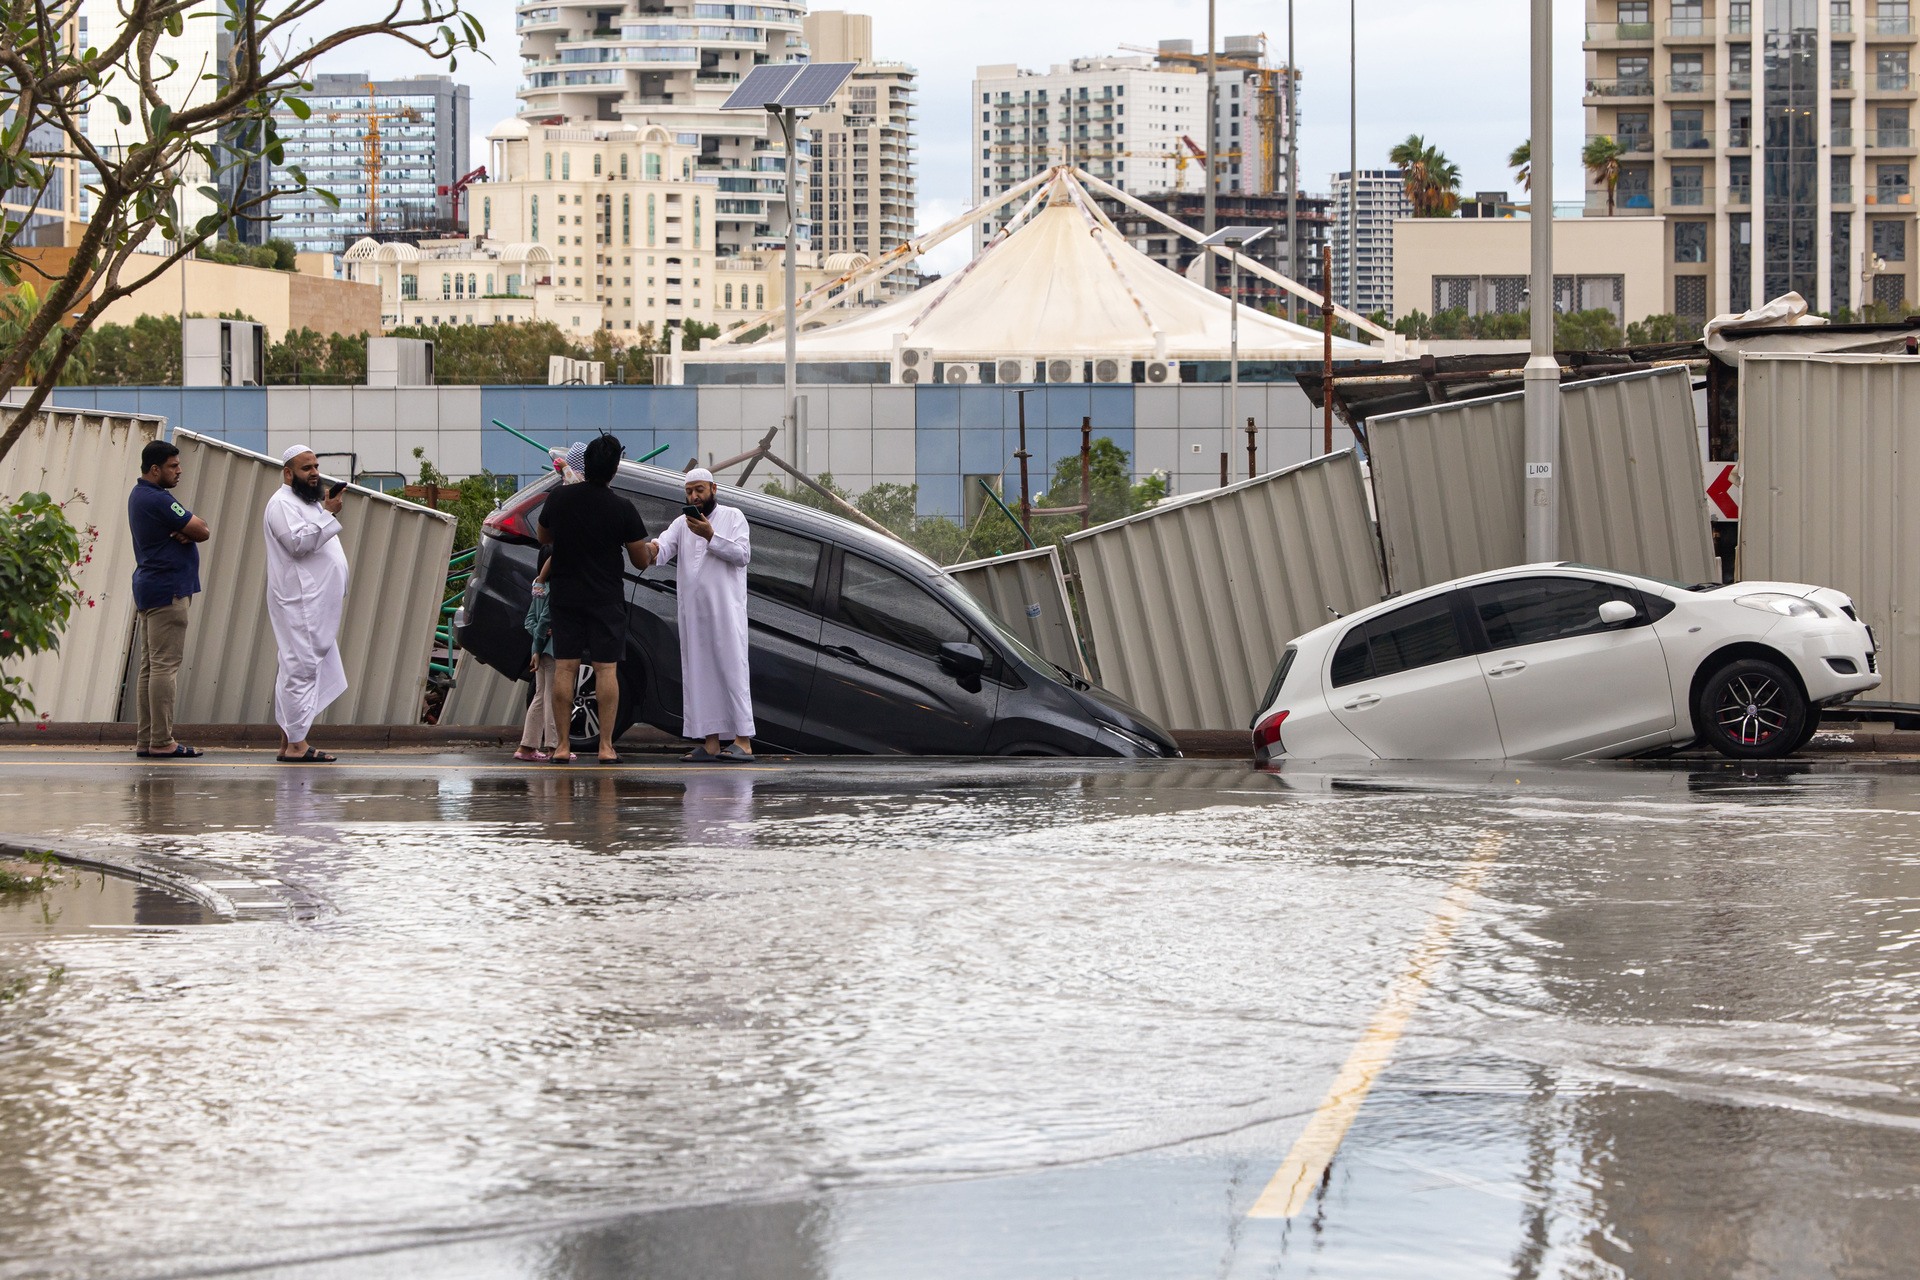 Damaged vehicles after a portion of a roadway collapsed after heavy rainfall in the Dubai Sports City district of Dubai, United Arab Emirates, on Tuesday.